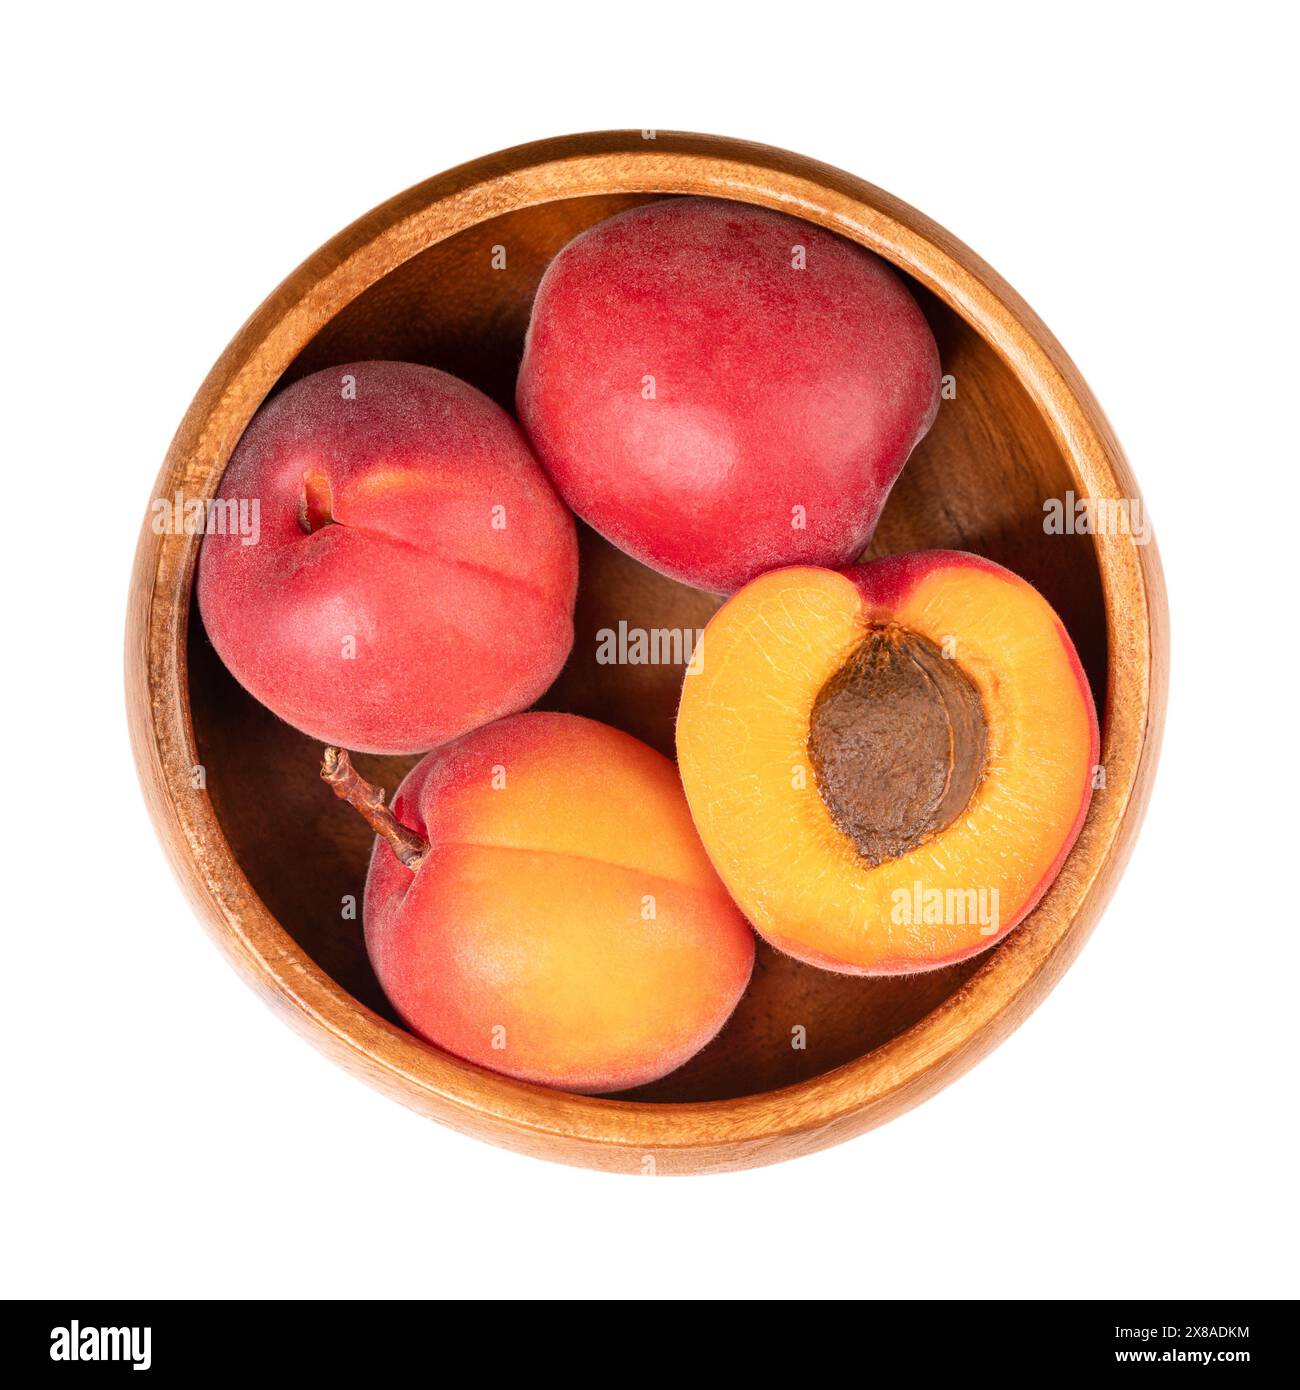 Fresh apricots in a wooden bowl. Stone fruits of Prunus armeniaca, similar to a small peach. Yellow fruits, tinged red on the side most exposed to sun. Stock Photo